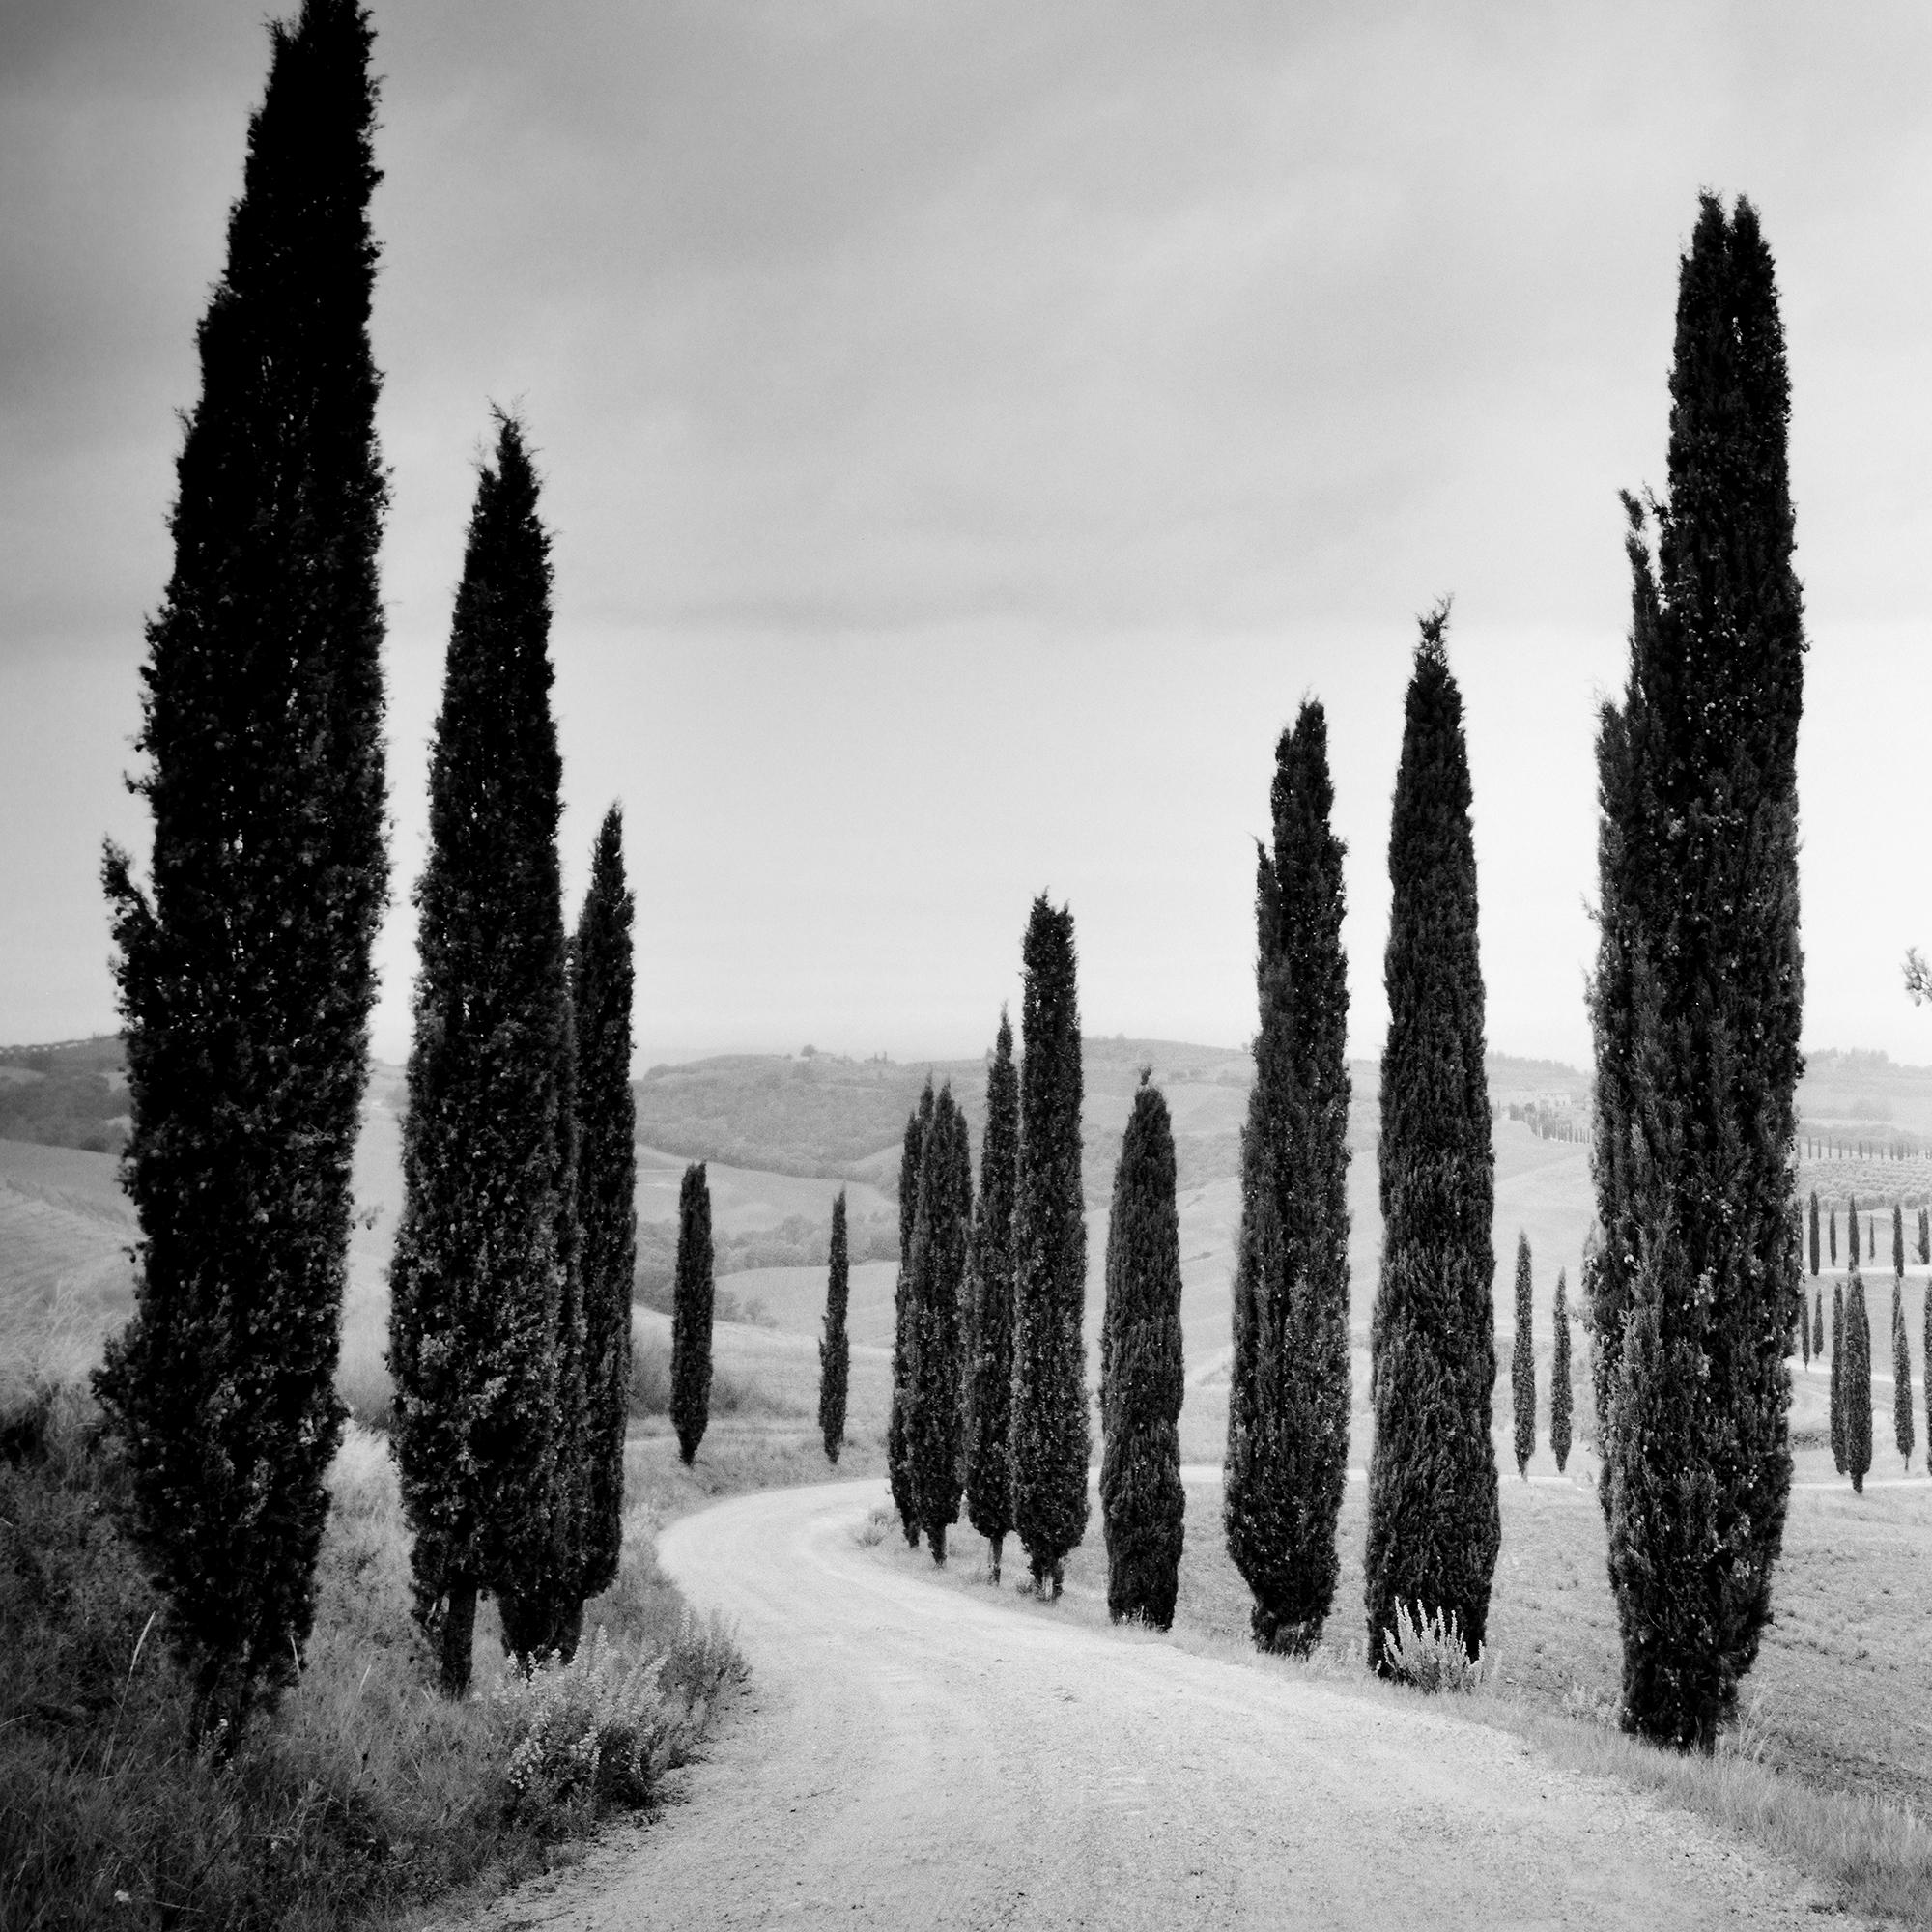 Black and white fine art landscape photography print. Road through cypress avenue in the heart of Tuscany, Italy. Archival pigment ink print, edition of 9. Signed, titled, dated and numbered by artist. Certificate of authenticity included. Printed